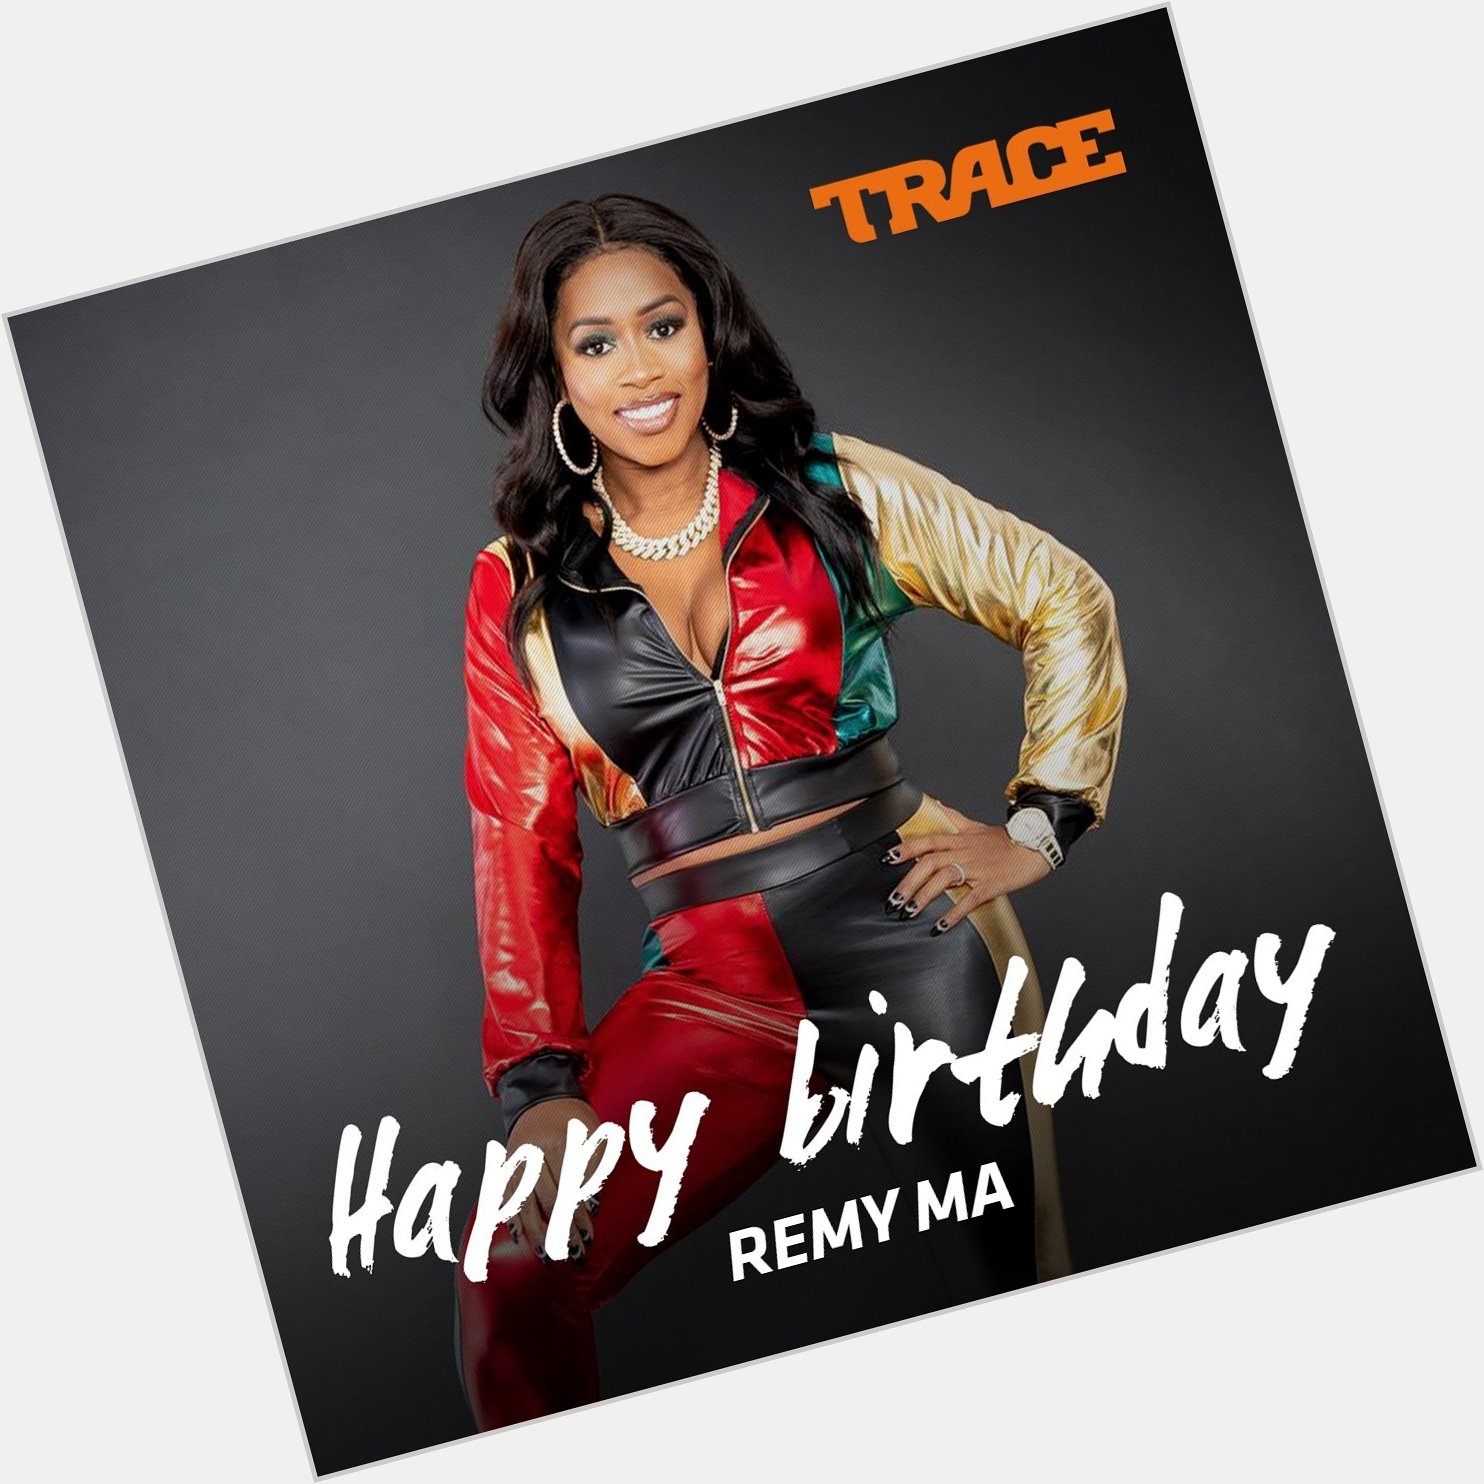 Happy Birthday to Remy Ma. 13 years in the game and you still killing it!  